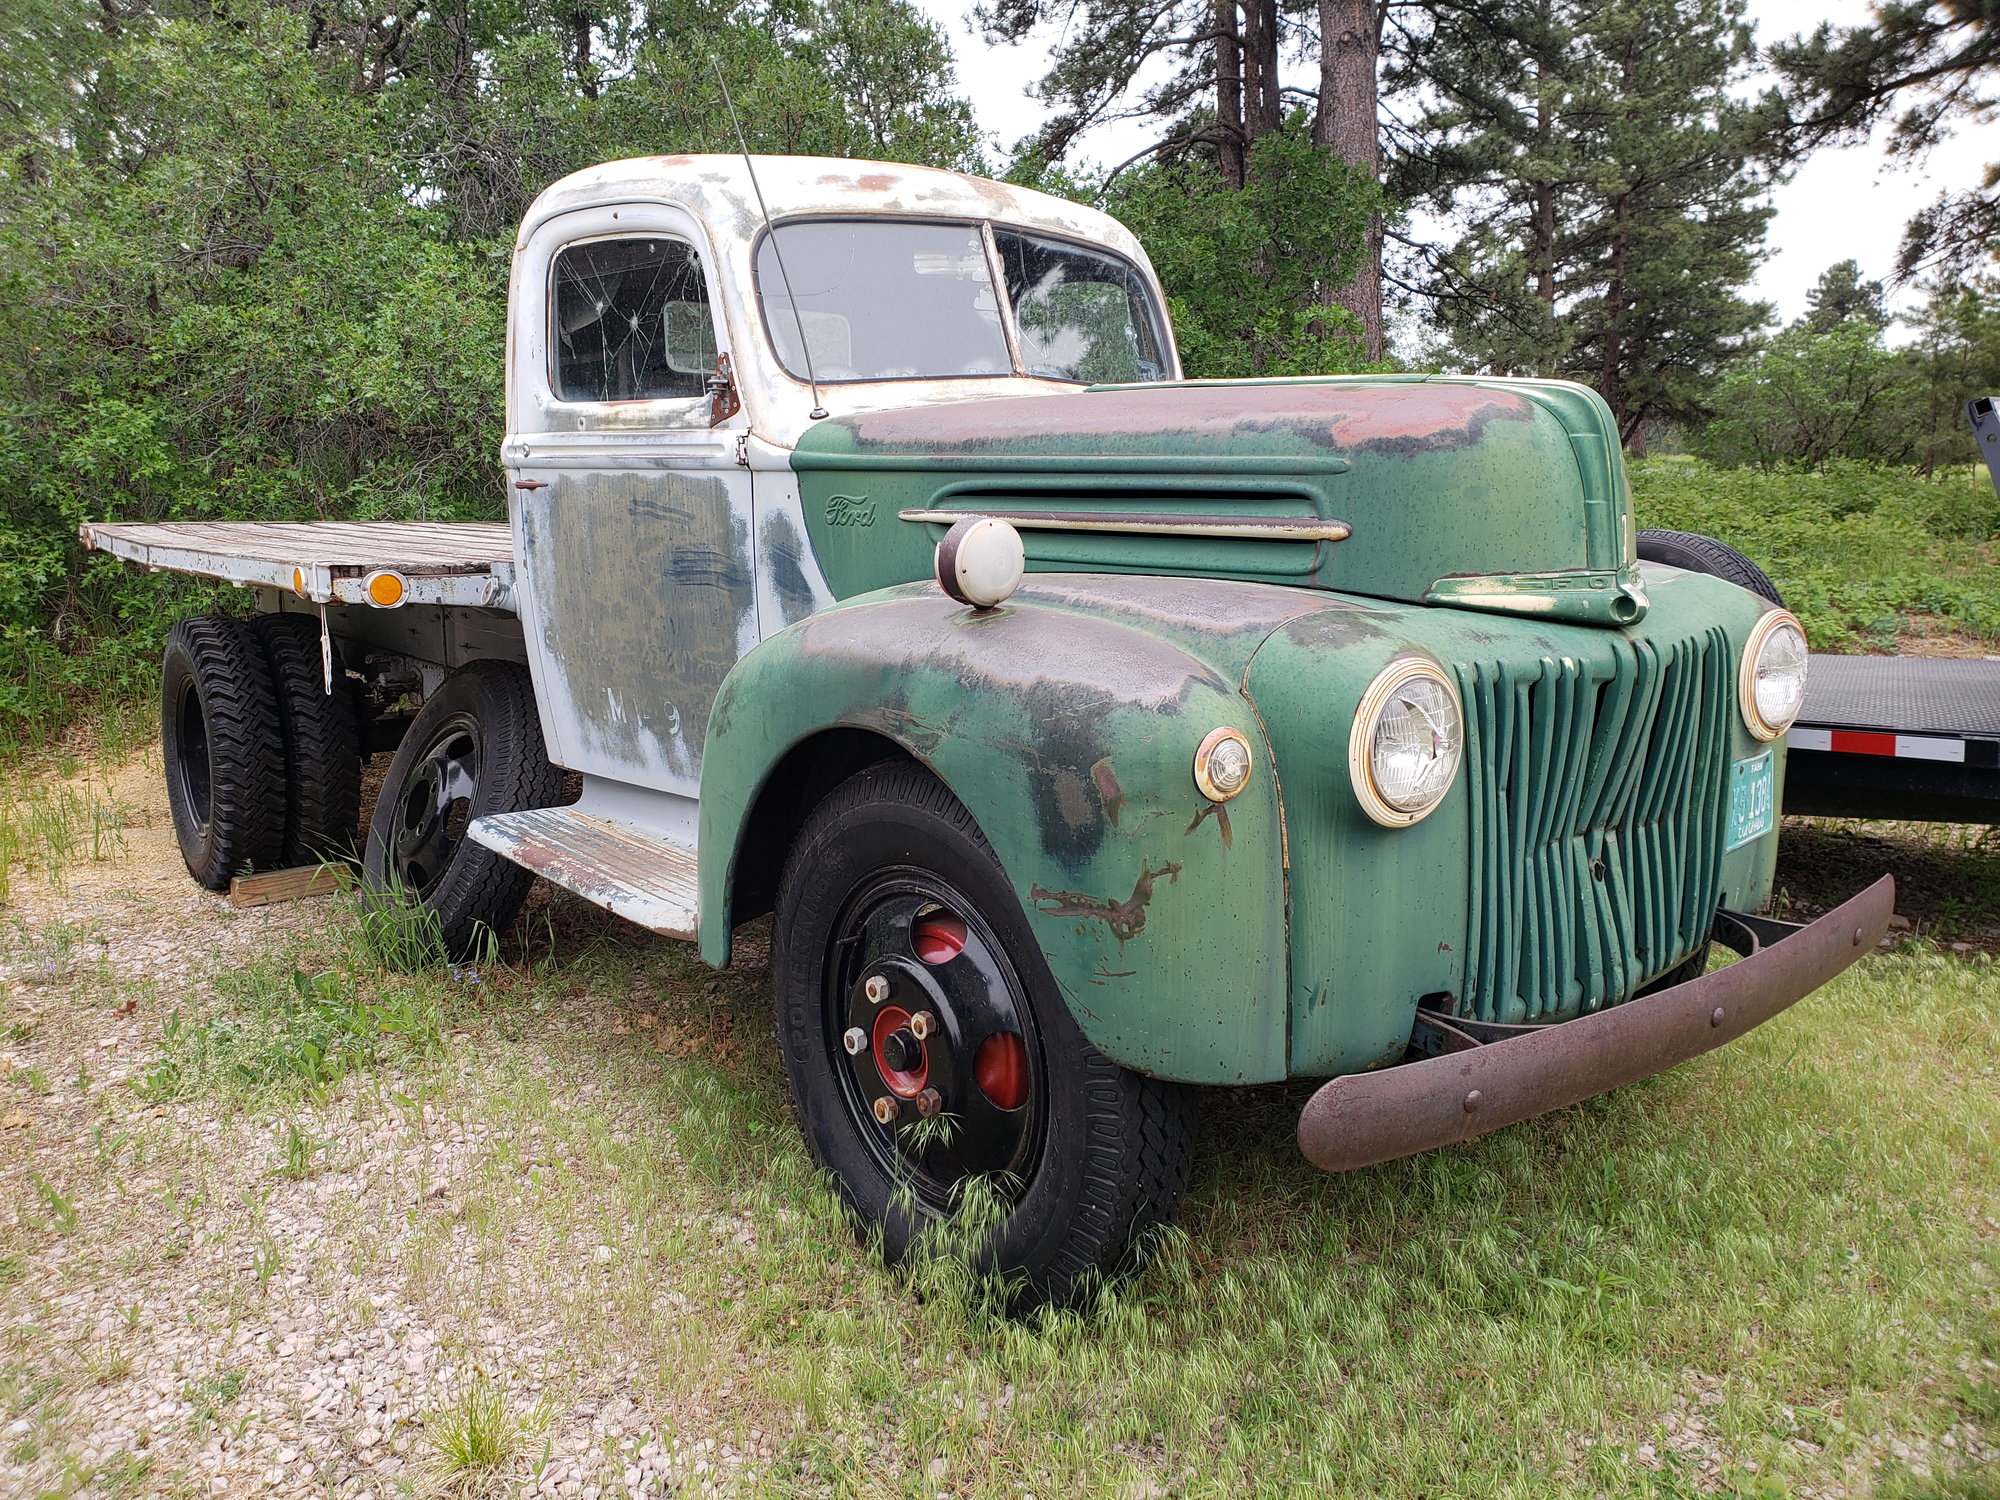 1946 Ford 1 Ton Pickup - 1944 Ford 1 1/2 Ton - Used - VIN 49T12345678910112 - 8 cyl - 2WD - Manual - Truck - Franktown, CO 80116, United States